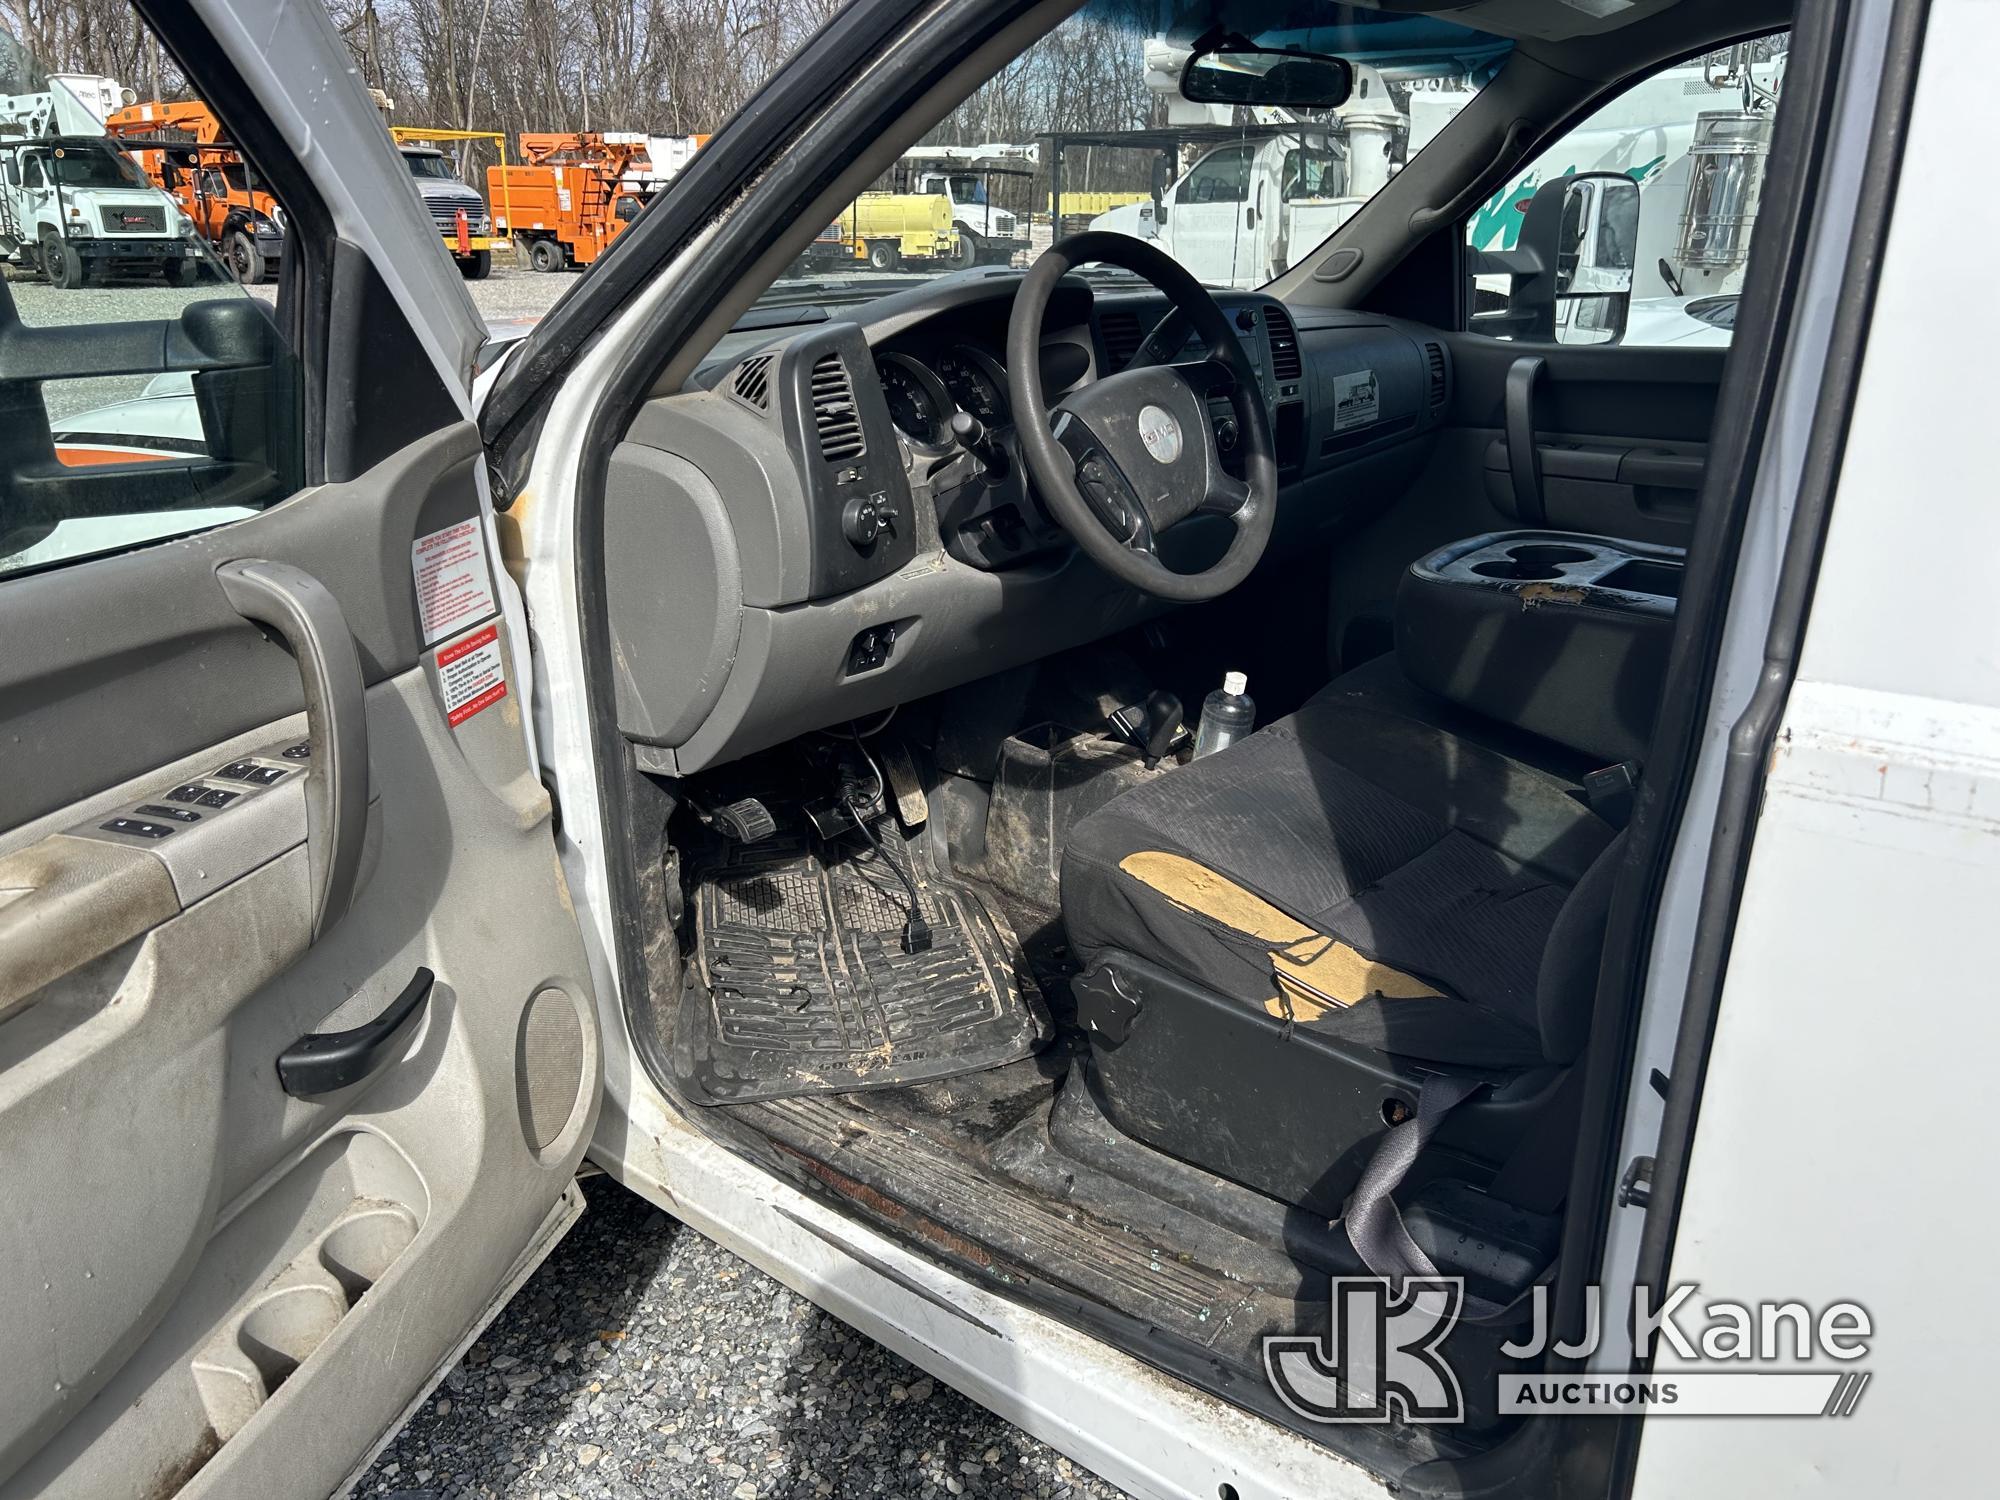 (Hagerstown, MD) 2011 GMC Sierra 2500 4x4 Extended-Cab Pickup Truck Runs & Moves, Jump To Start, Win